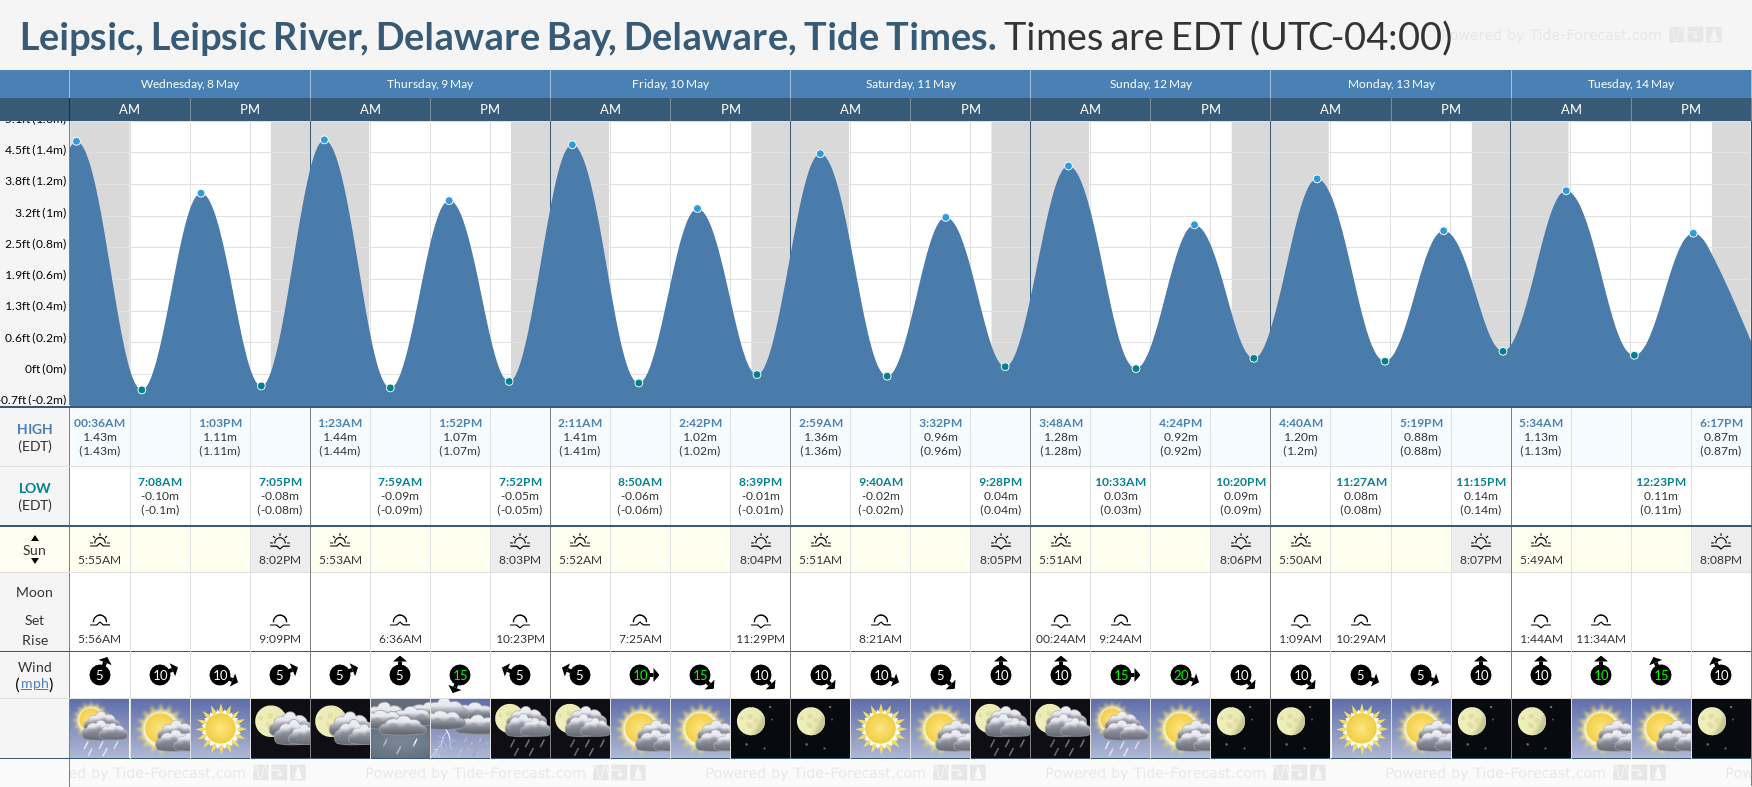 Leipsic, Leipsic River, Delaware Bay, Delaware Tide Chart including high and low tide times for the next 7 days